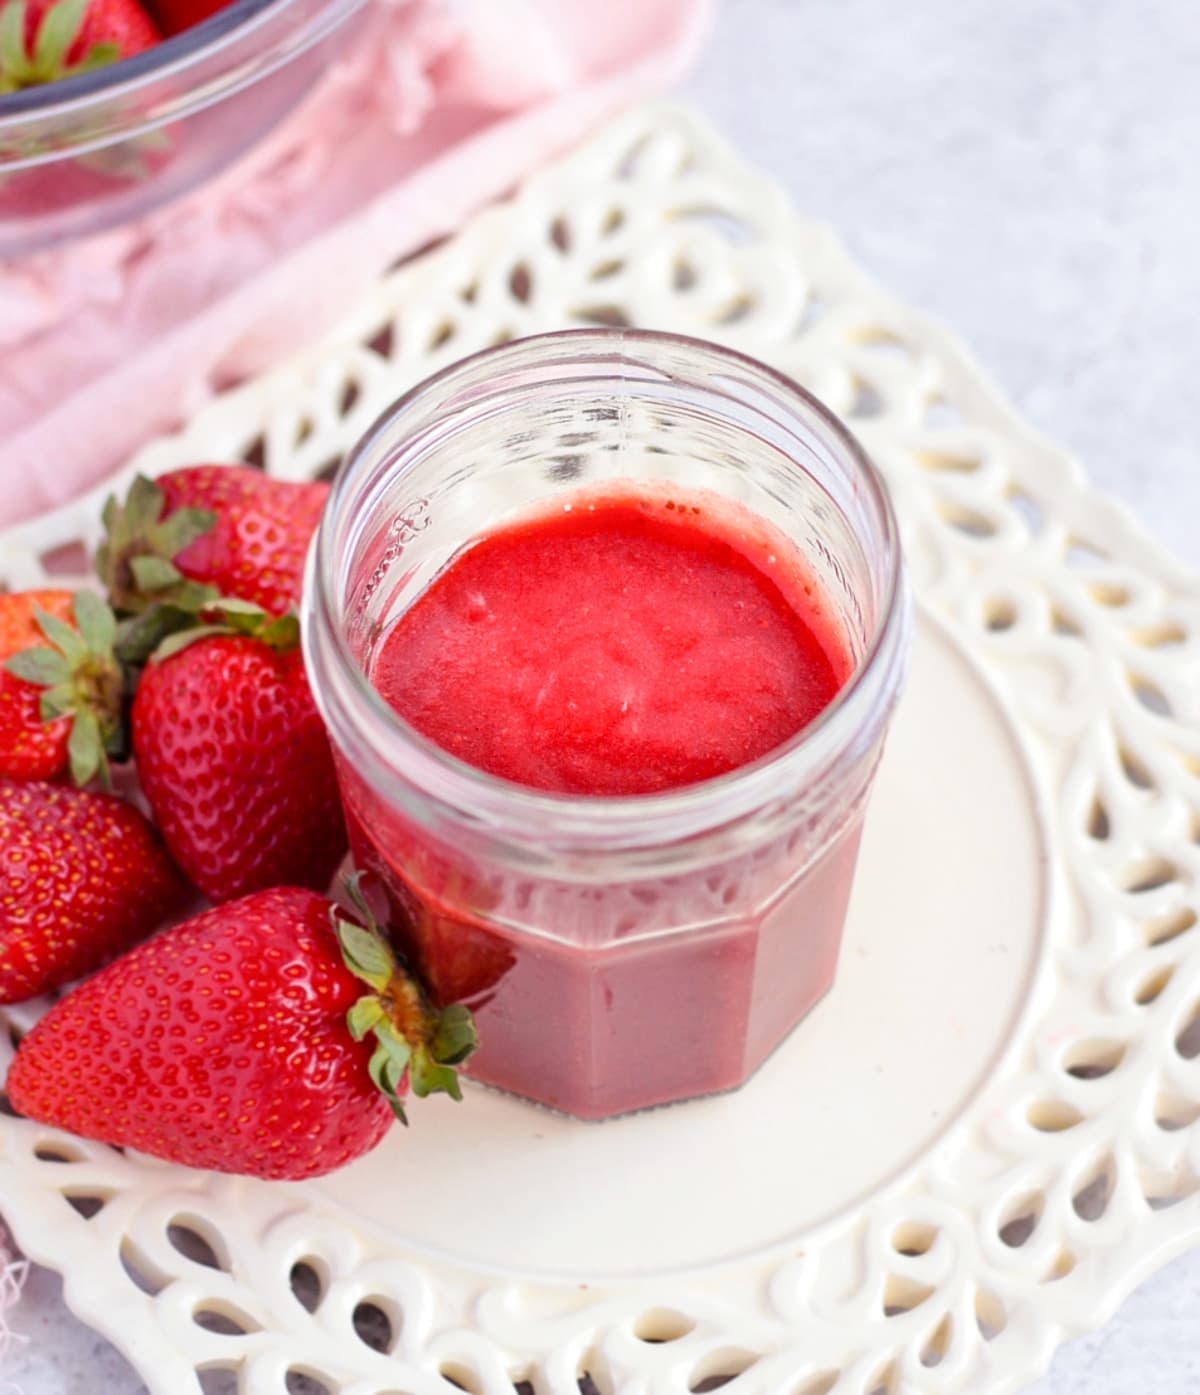 Strawberry Sauce in a jar from above.